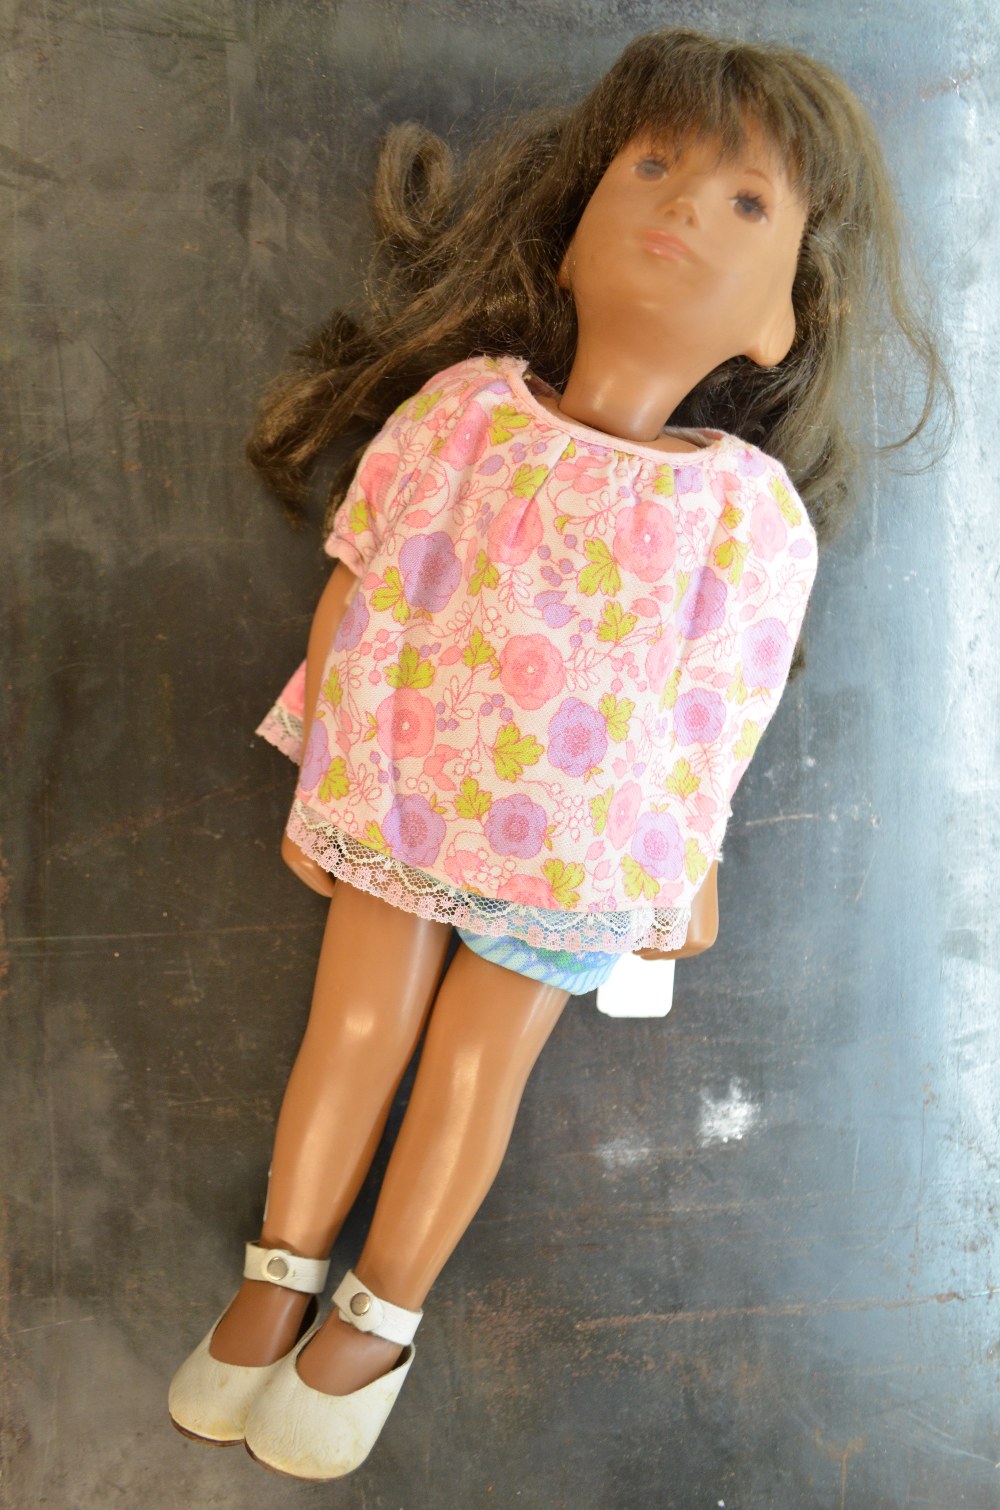 'Sasha' doll with tanned body and brunette wig, - Image 2 of 4